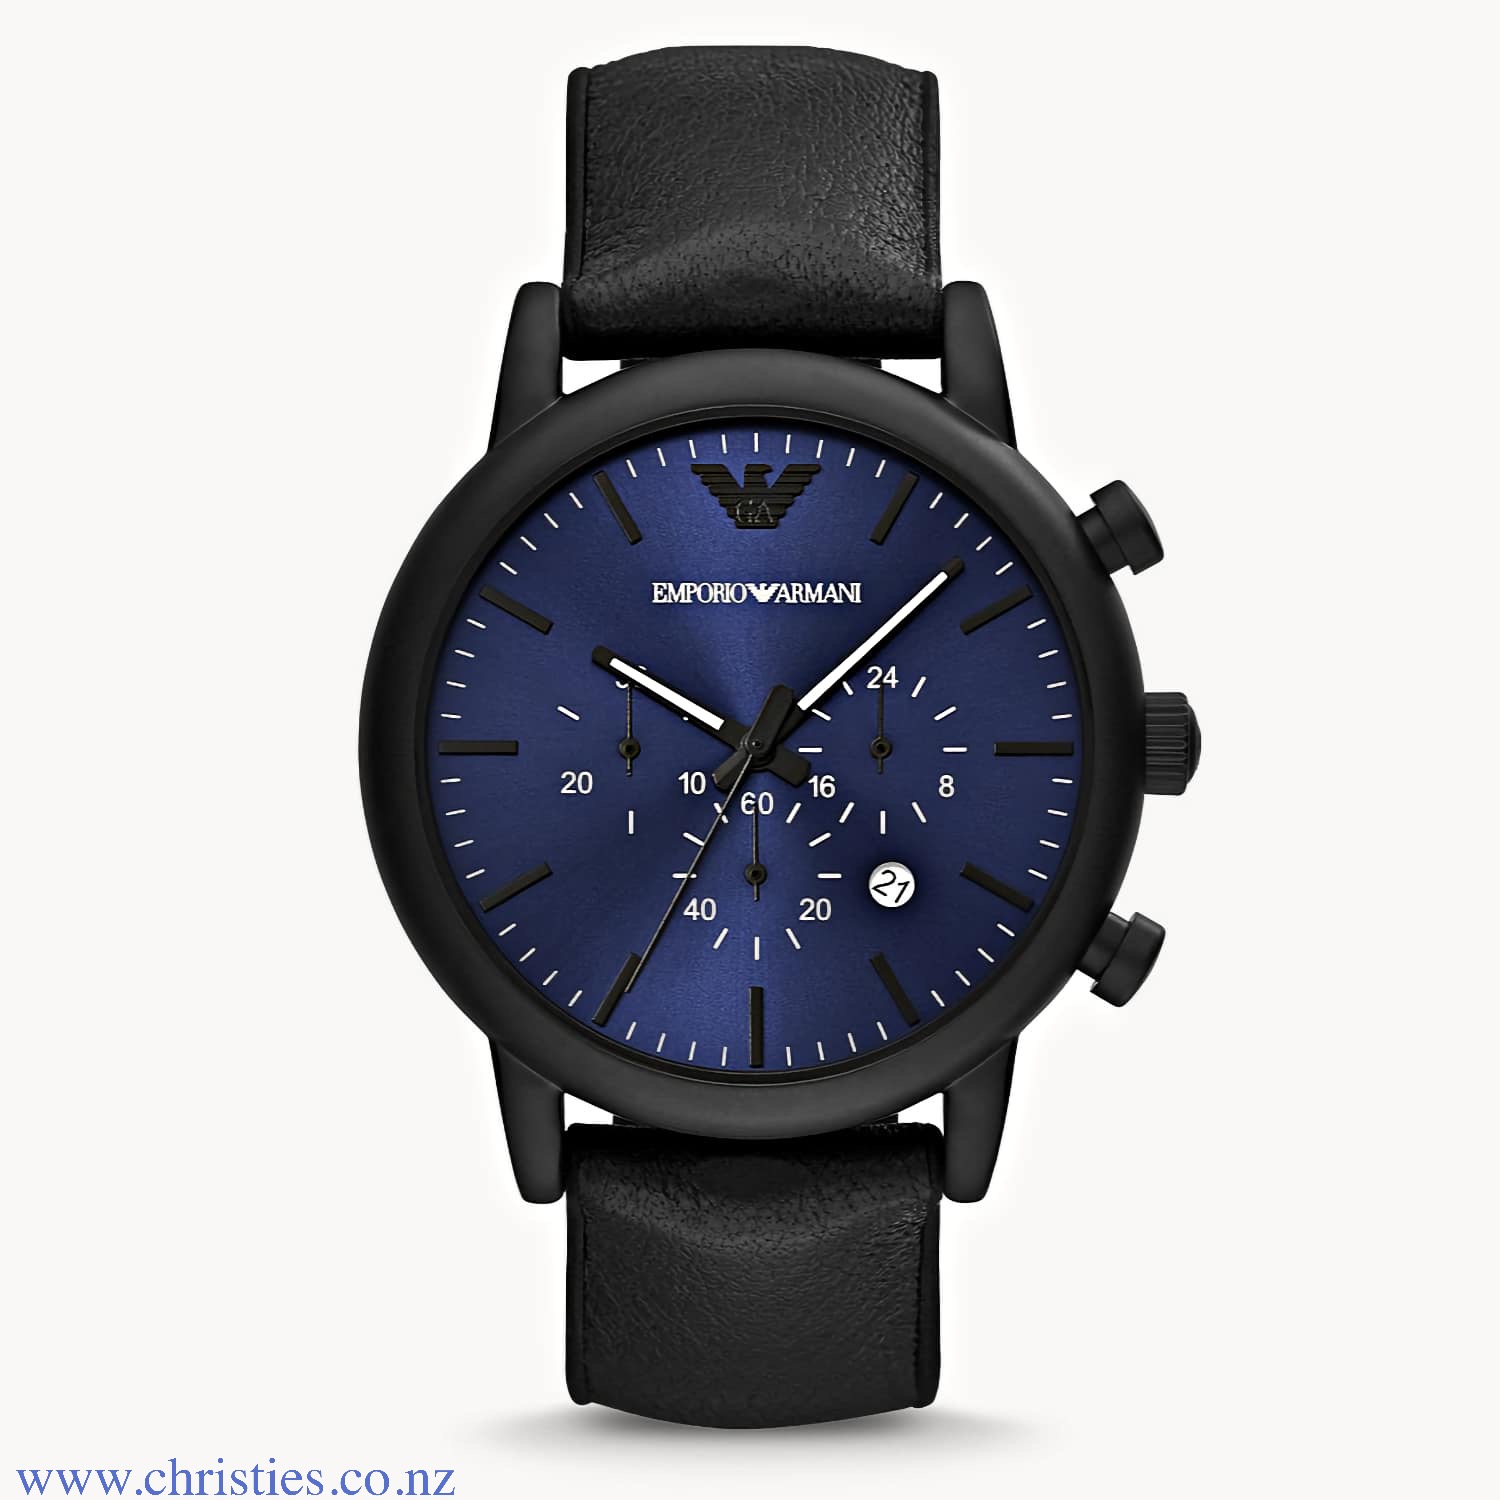 AR11351 Emporio Armani Chronograph Black Leather Luigi Watch. This 46mm Emporio Armani watch features a blue dial withblack stick indexes, chronograph movement and black leather strap LAYBUY - Pay it easy, in 6 weekly payments and have it now. Only pay th